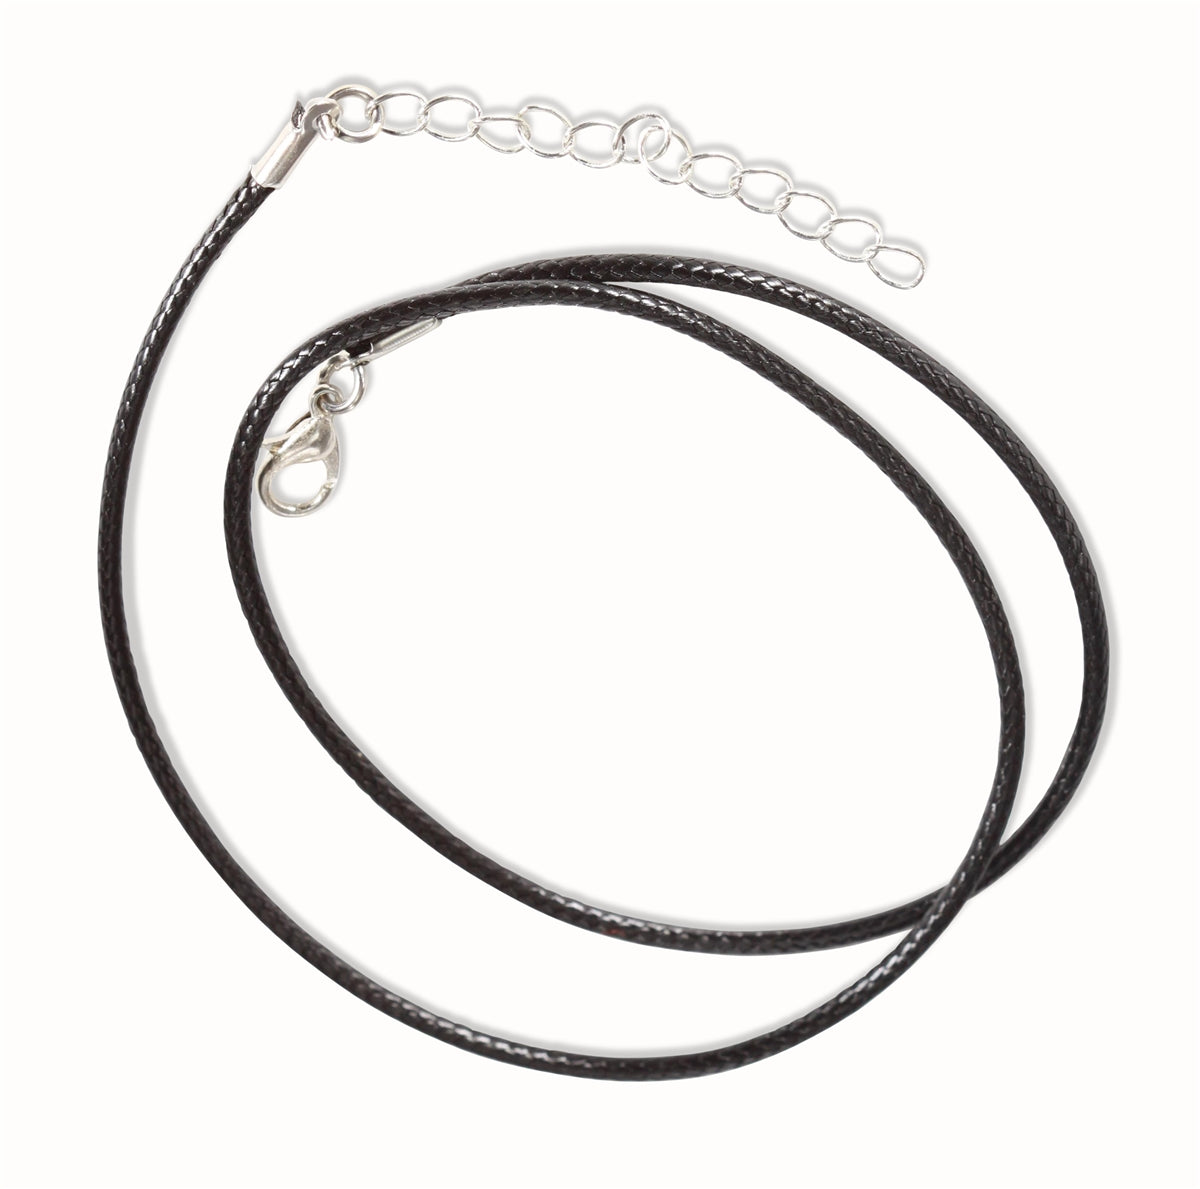 Adjustable Cotton Cord Necklace featuring a 17-19 inch waxed cotton cord with a 2 inch extension chain and lead and nickel free zinc alloy materials.